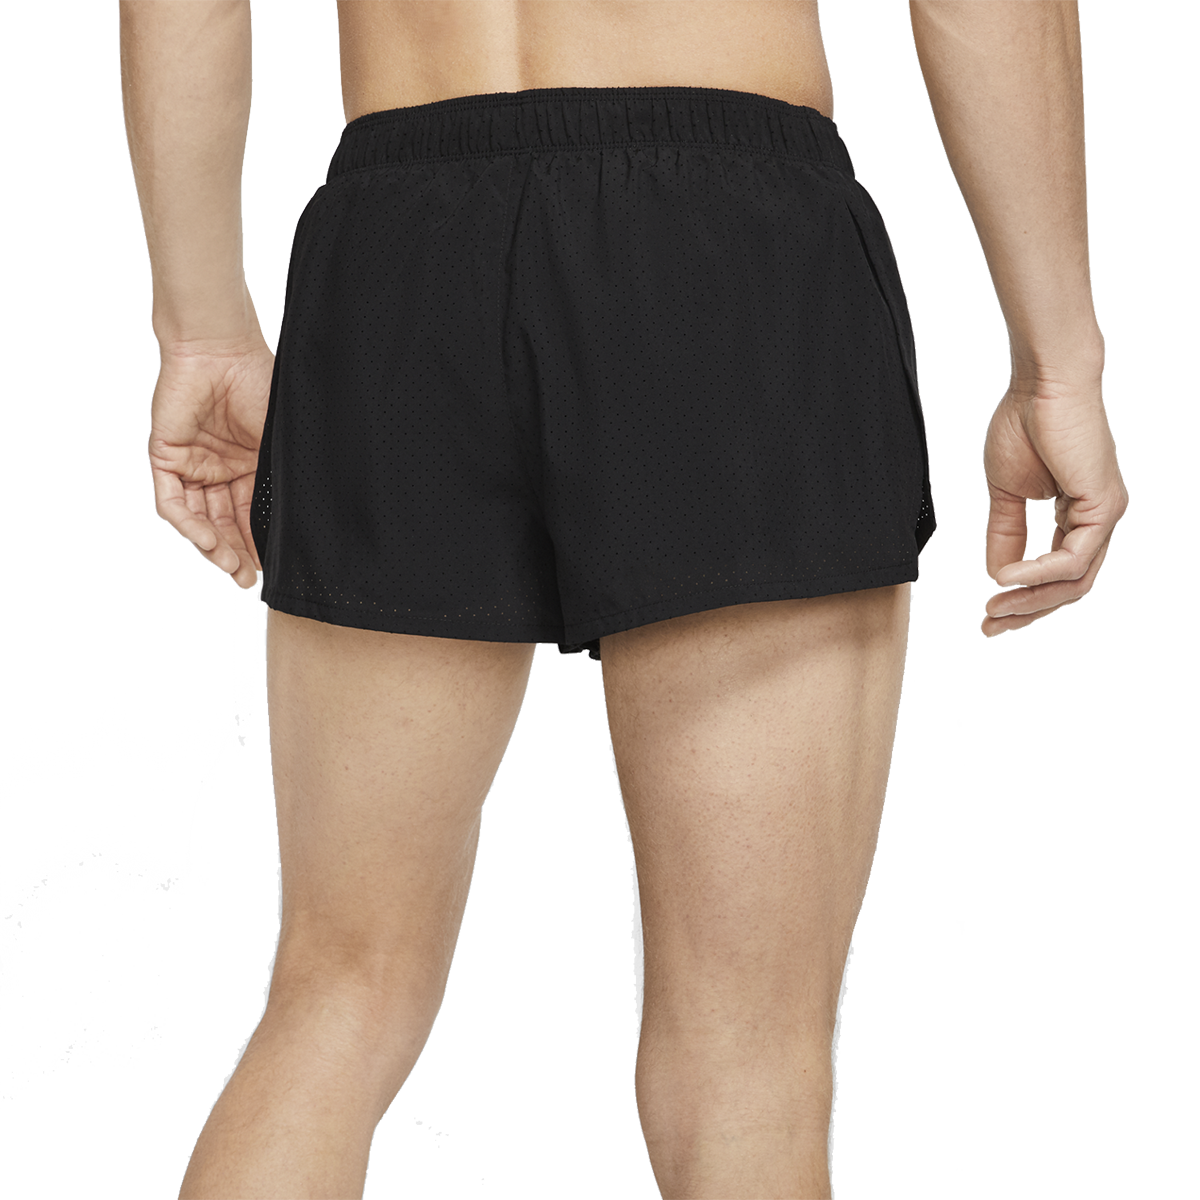 Nike Dri-FIT Fast 2" Short, , large image number null